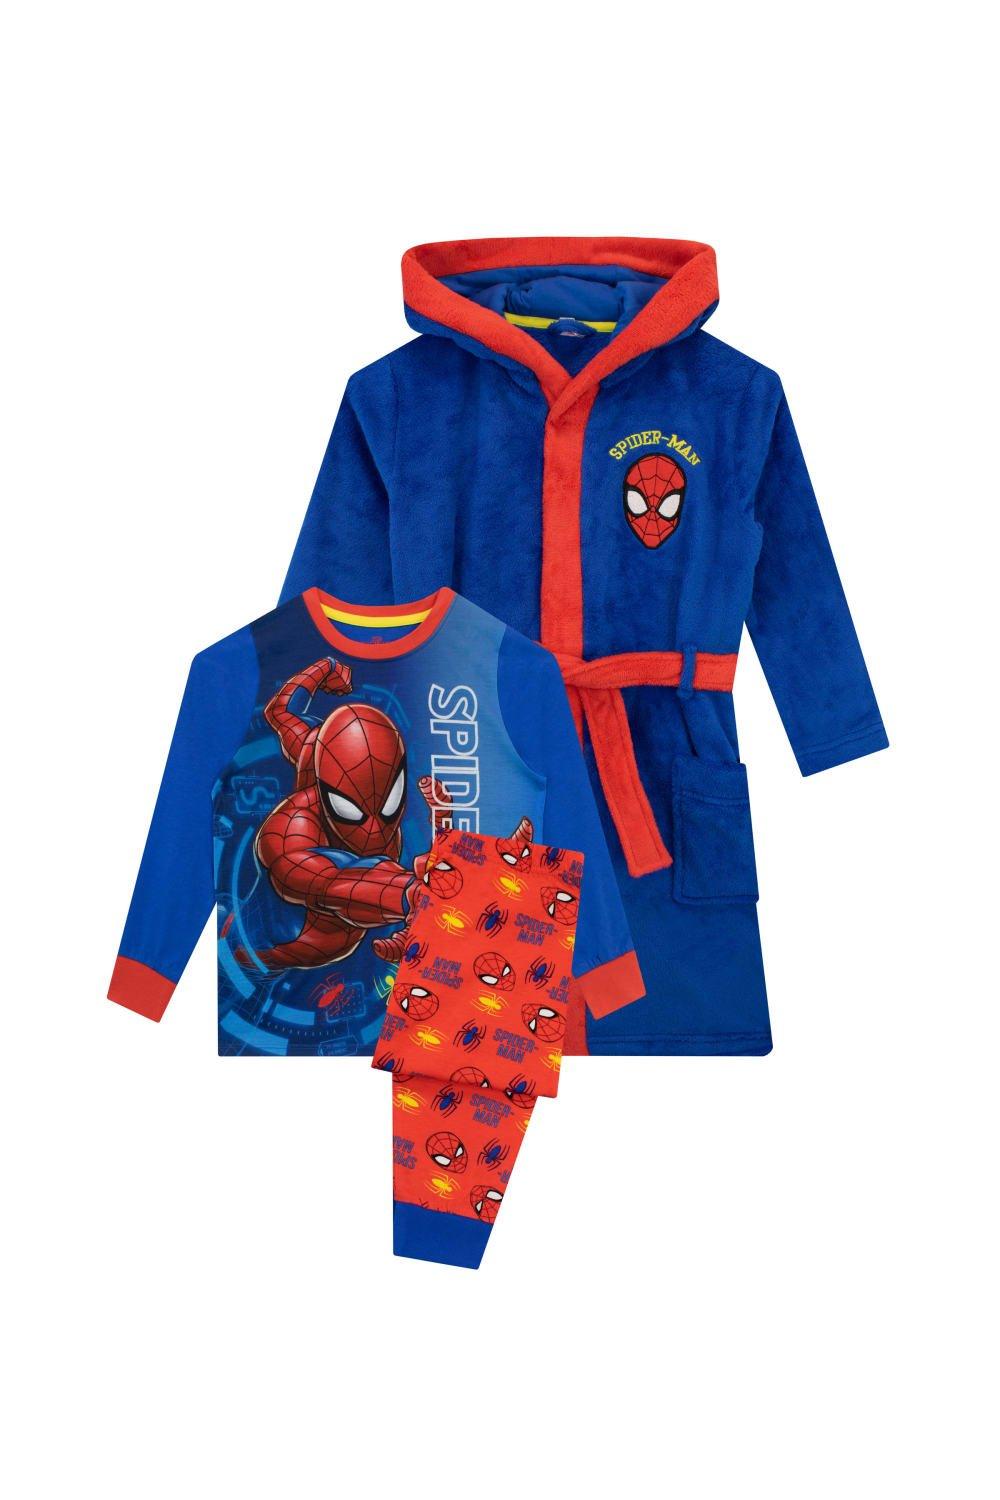 Spiderman Dressing Gown And Pyjamas Set